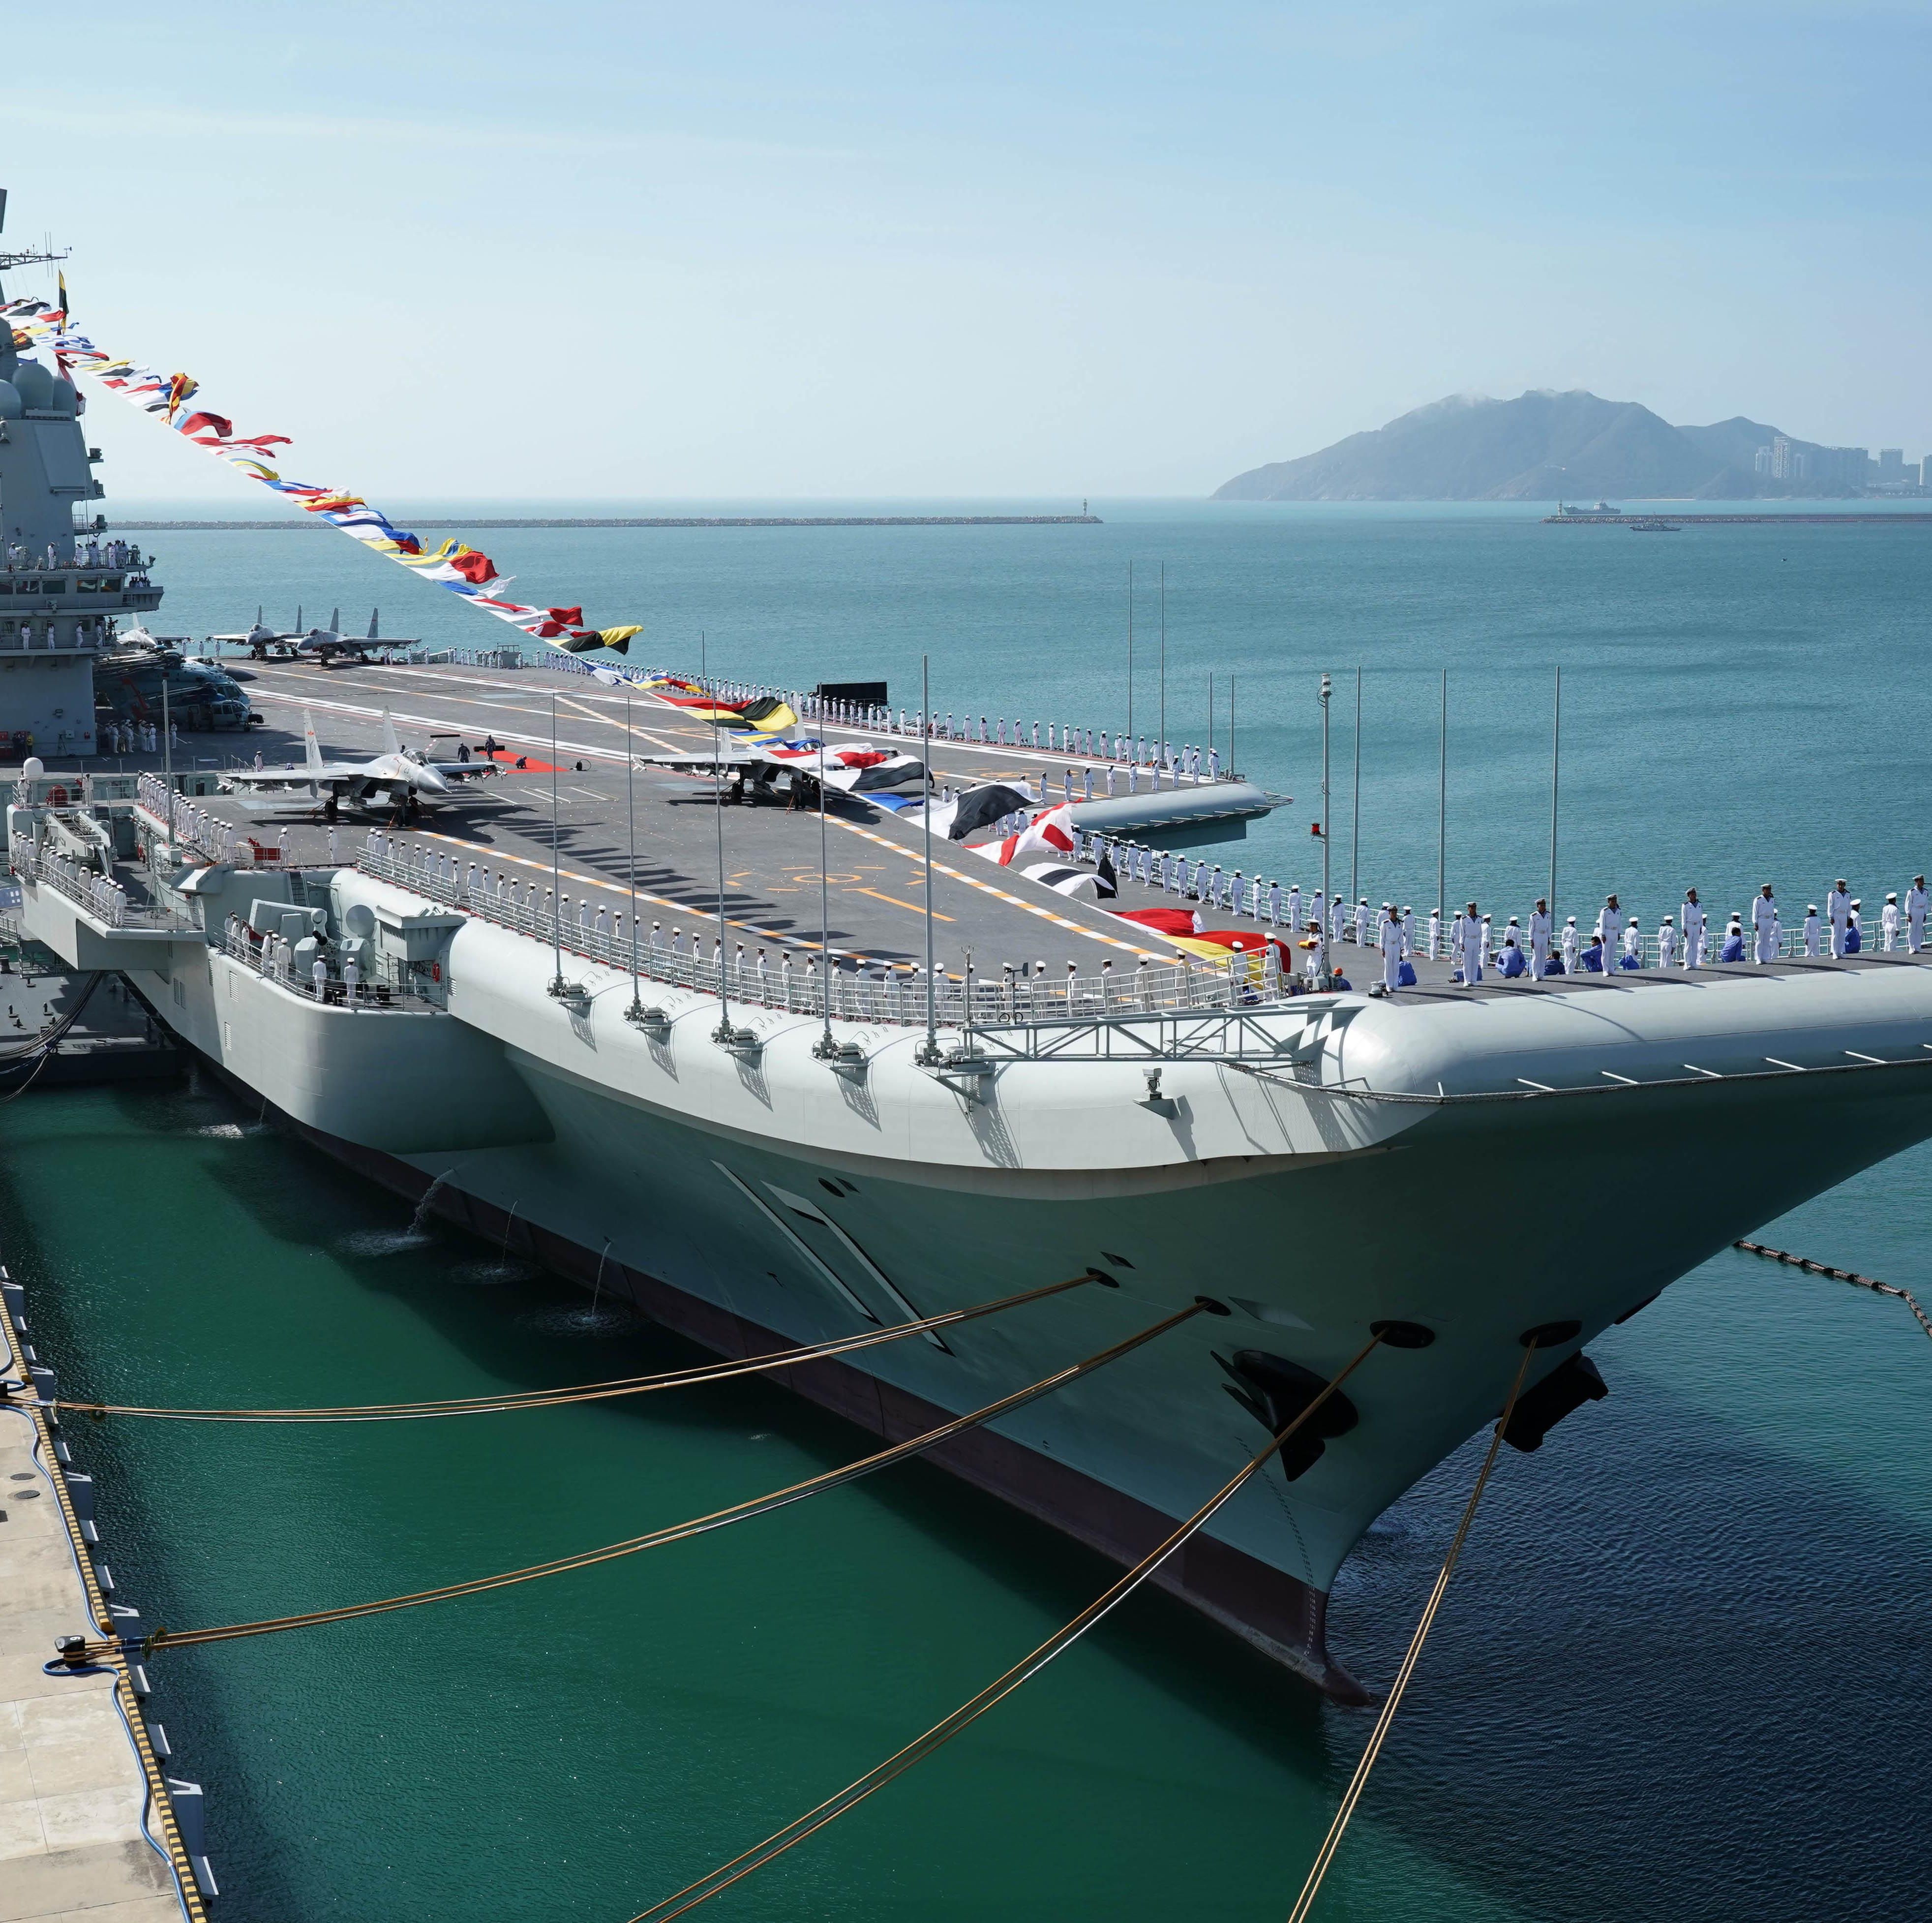 Every. Single. Aircraft Carrier. In the World